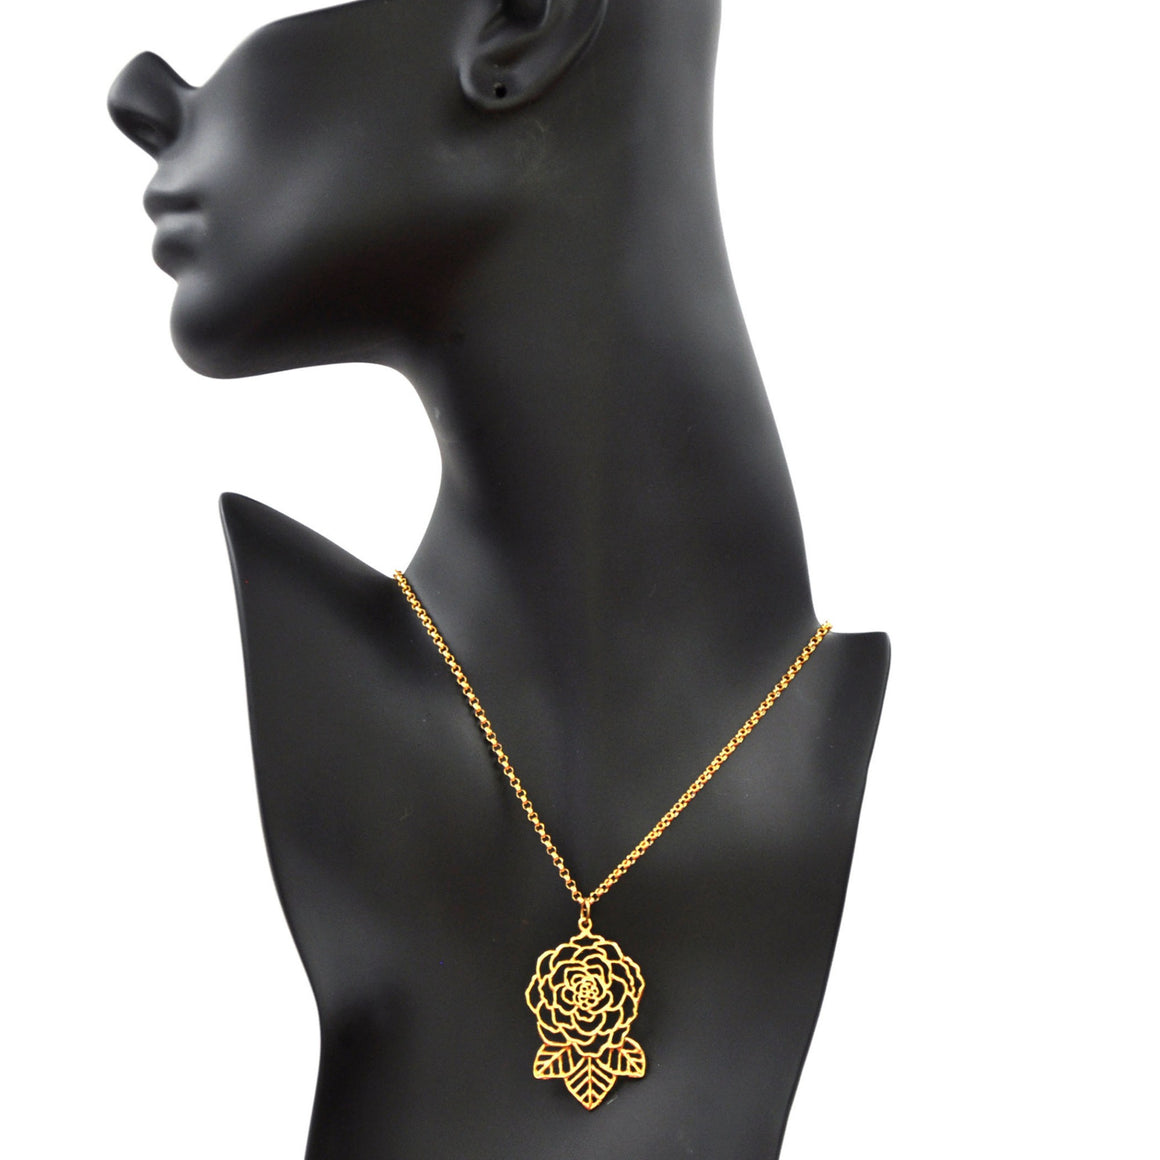 Rose and Leaves Necklace - 24K Gold Plated